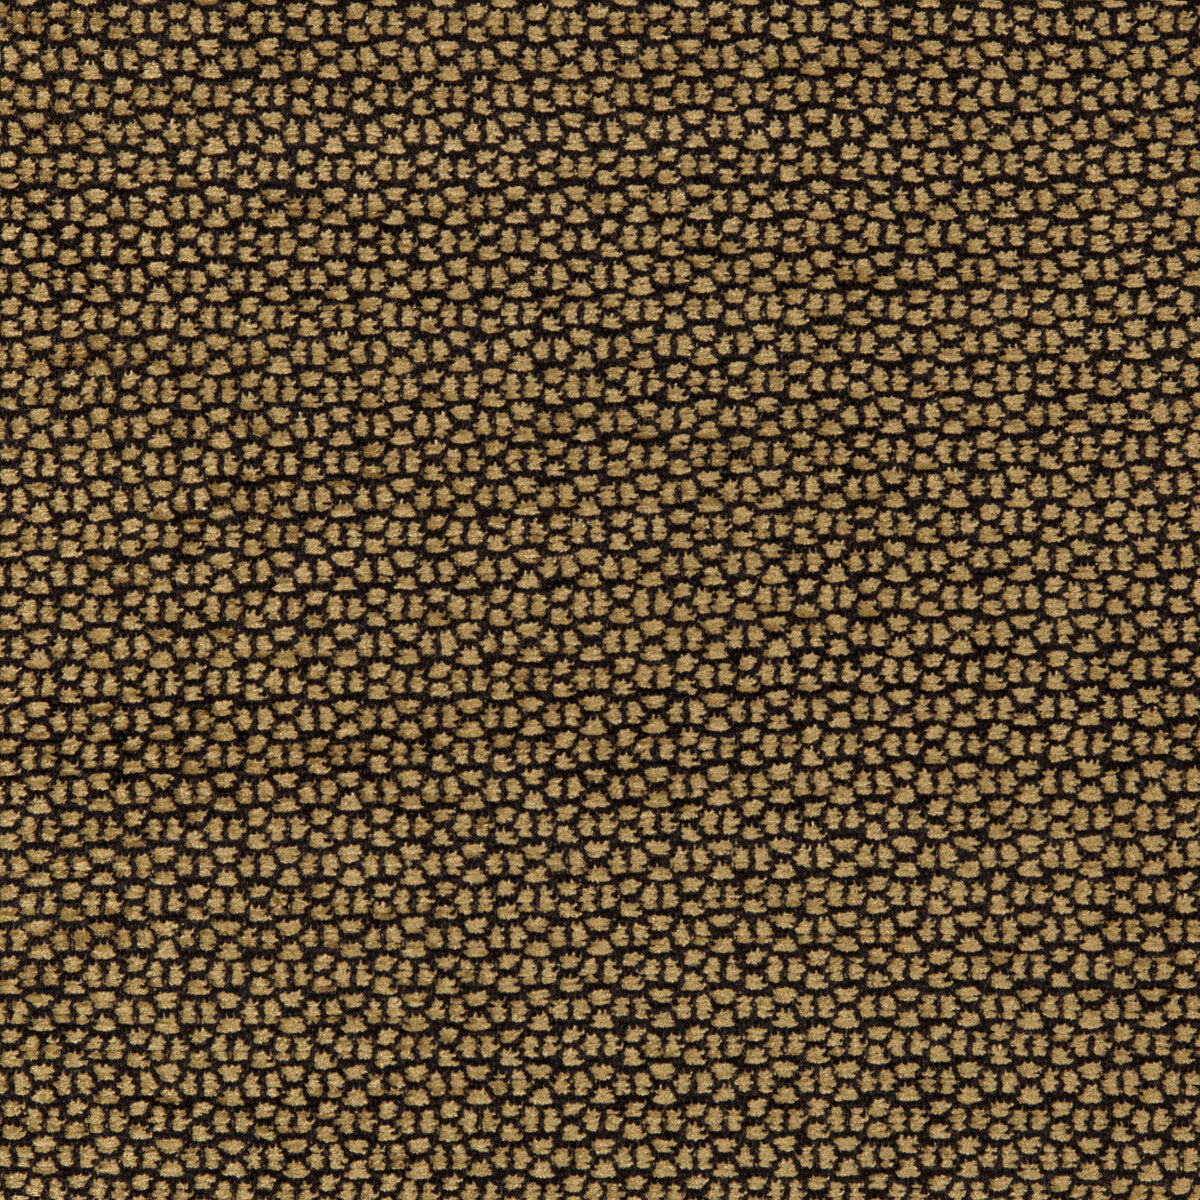 Marolay Texture fabric in sable color - pattern 8019144.68.0 - by Brunschwig &amp; Fils in the Chambery Textures II collection